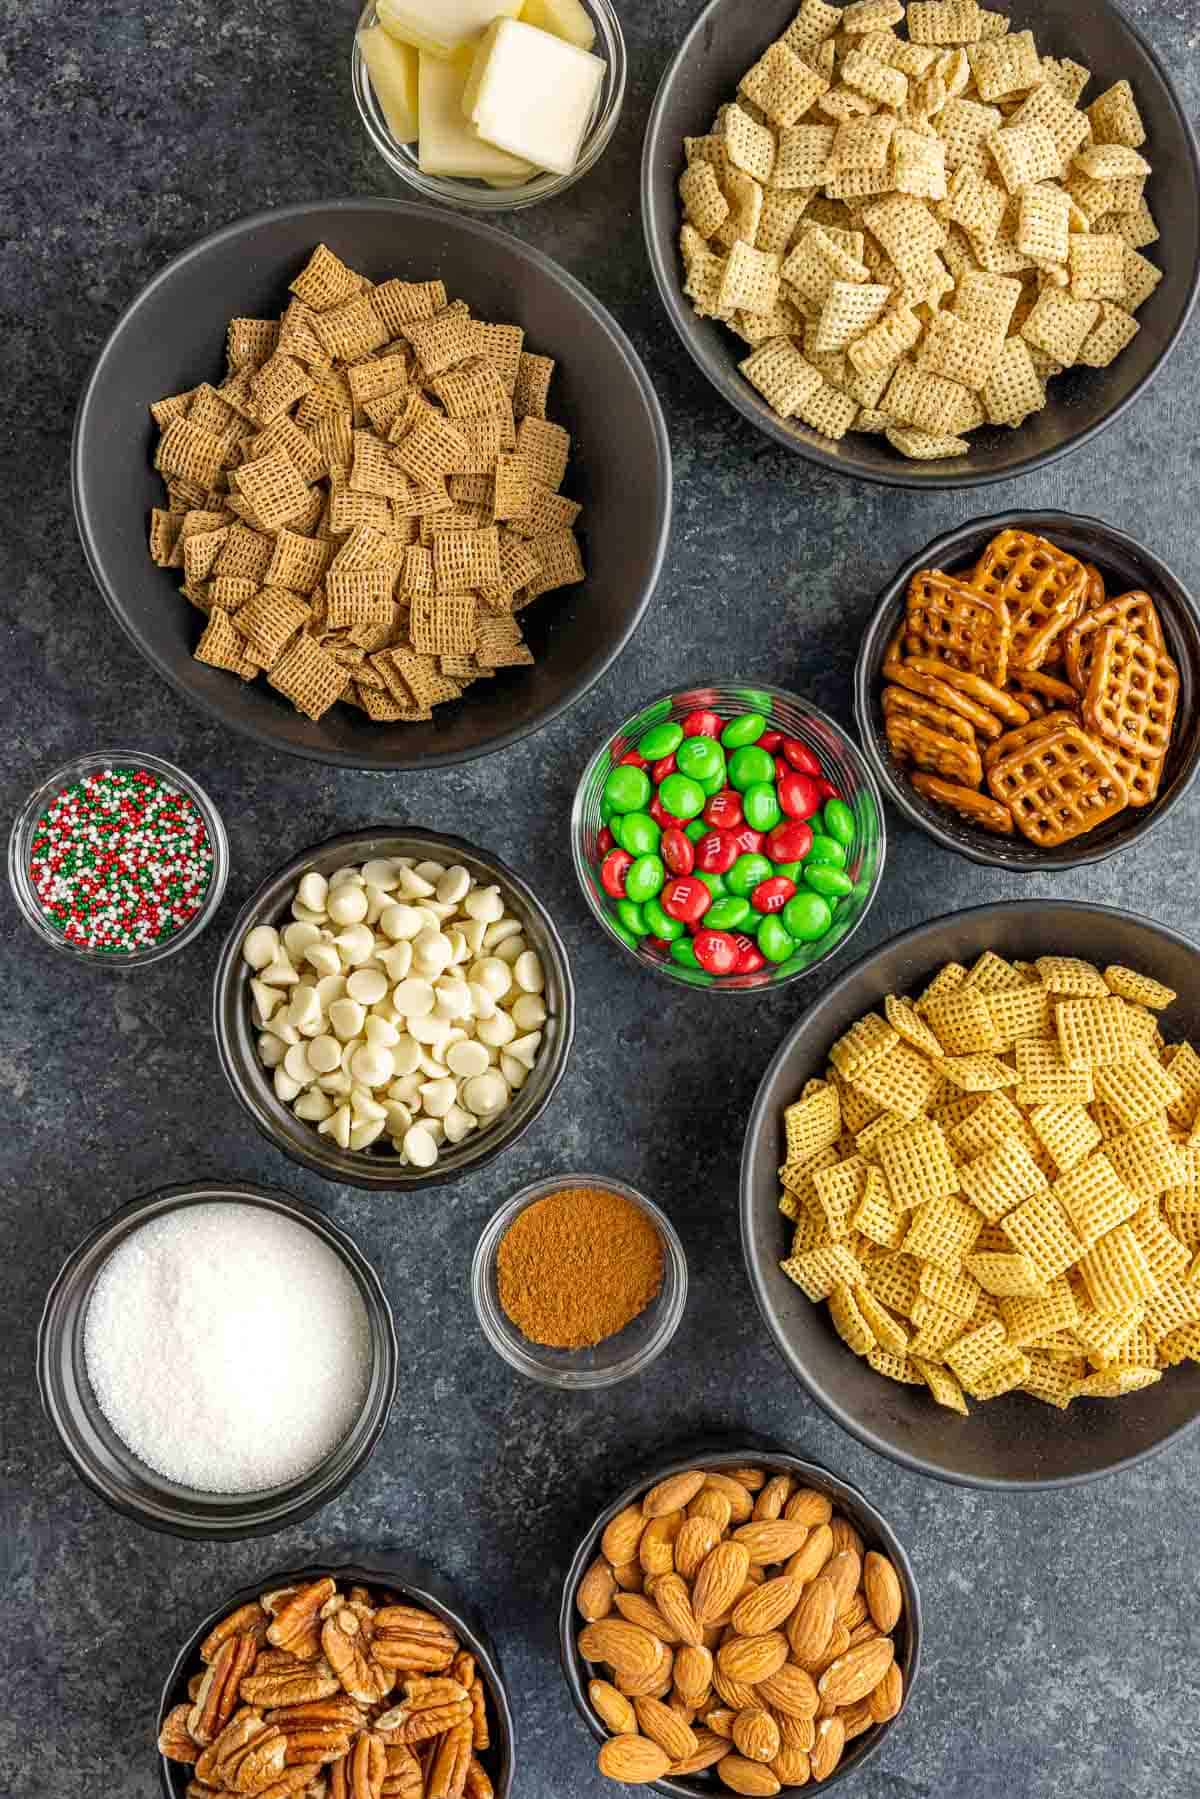 Ingredients for Christmas Chex mix